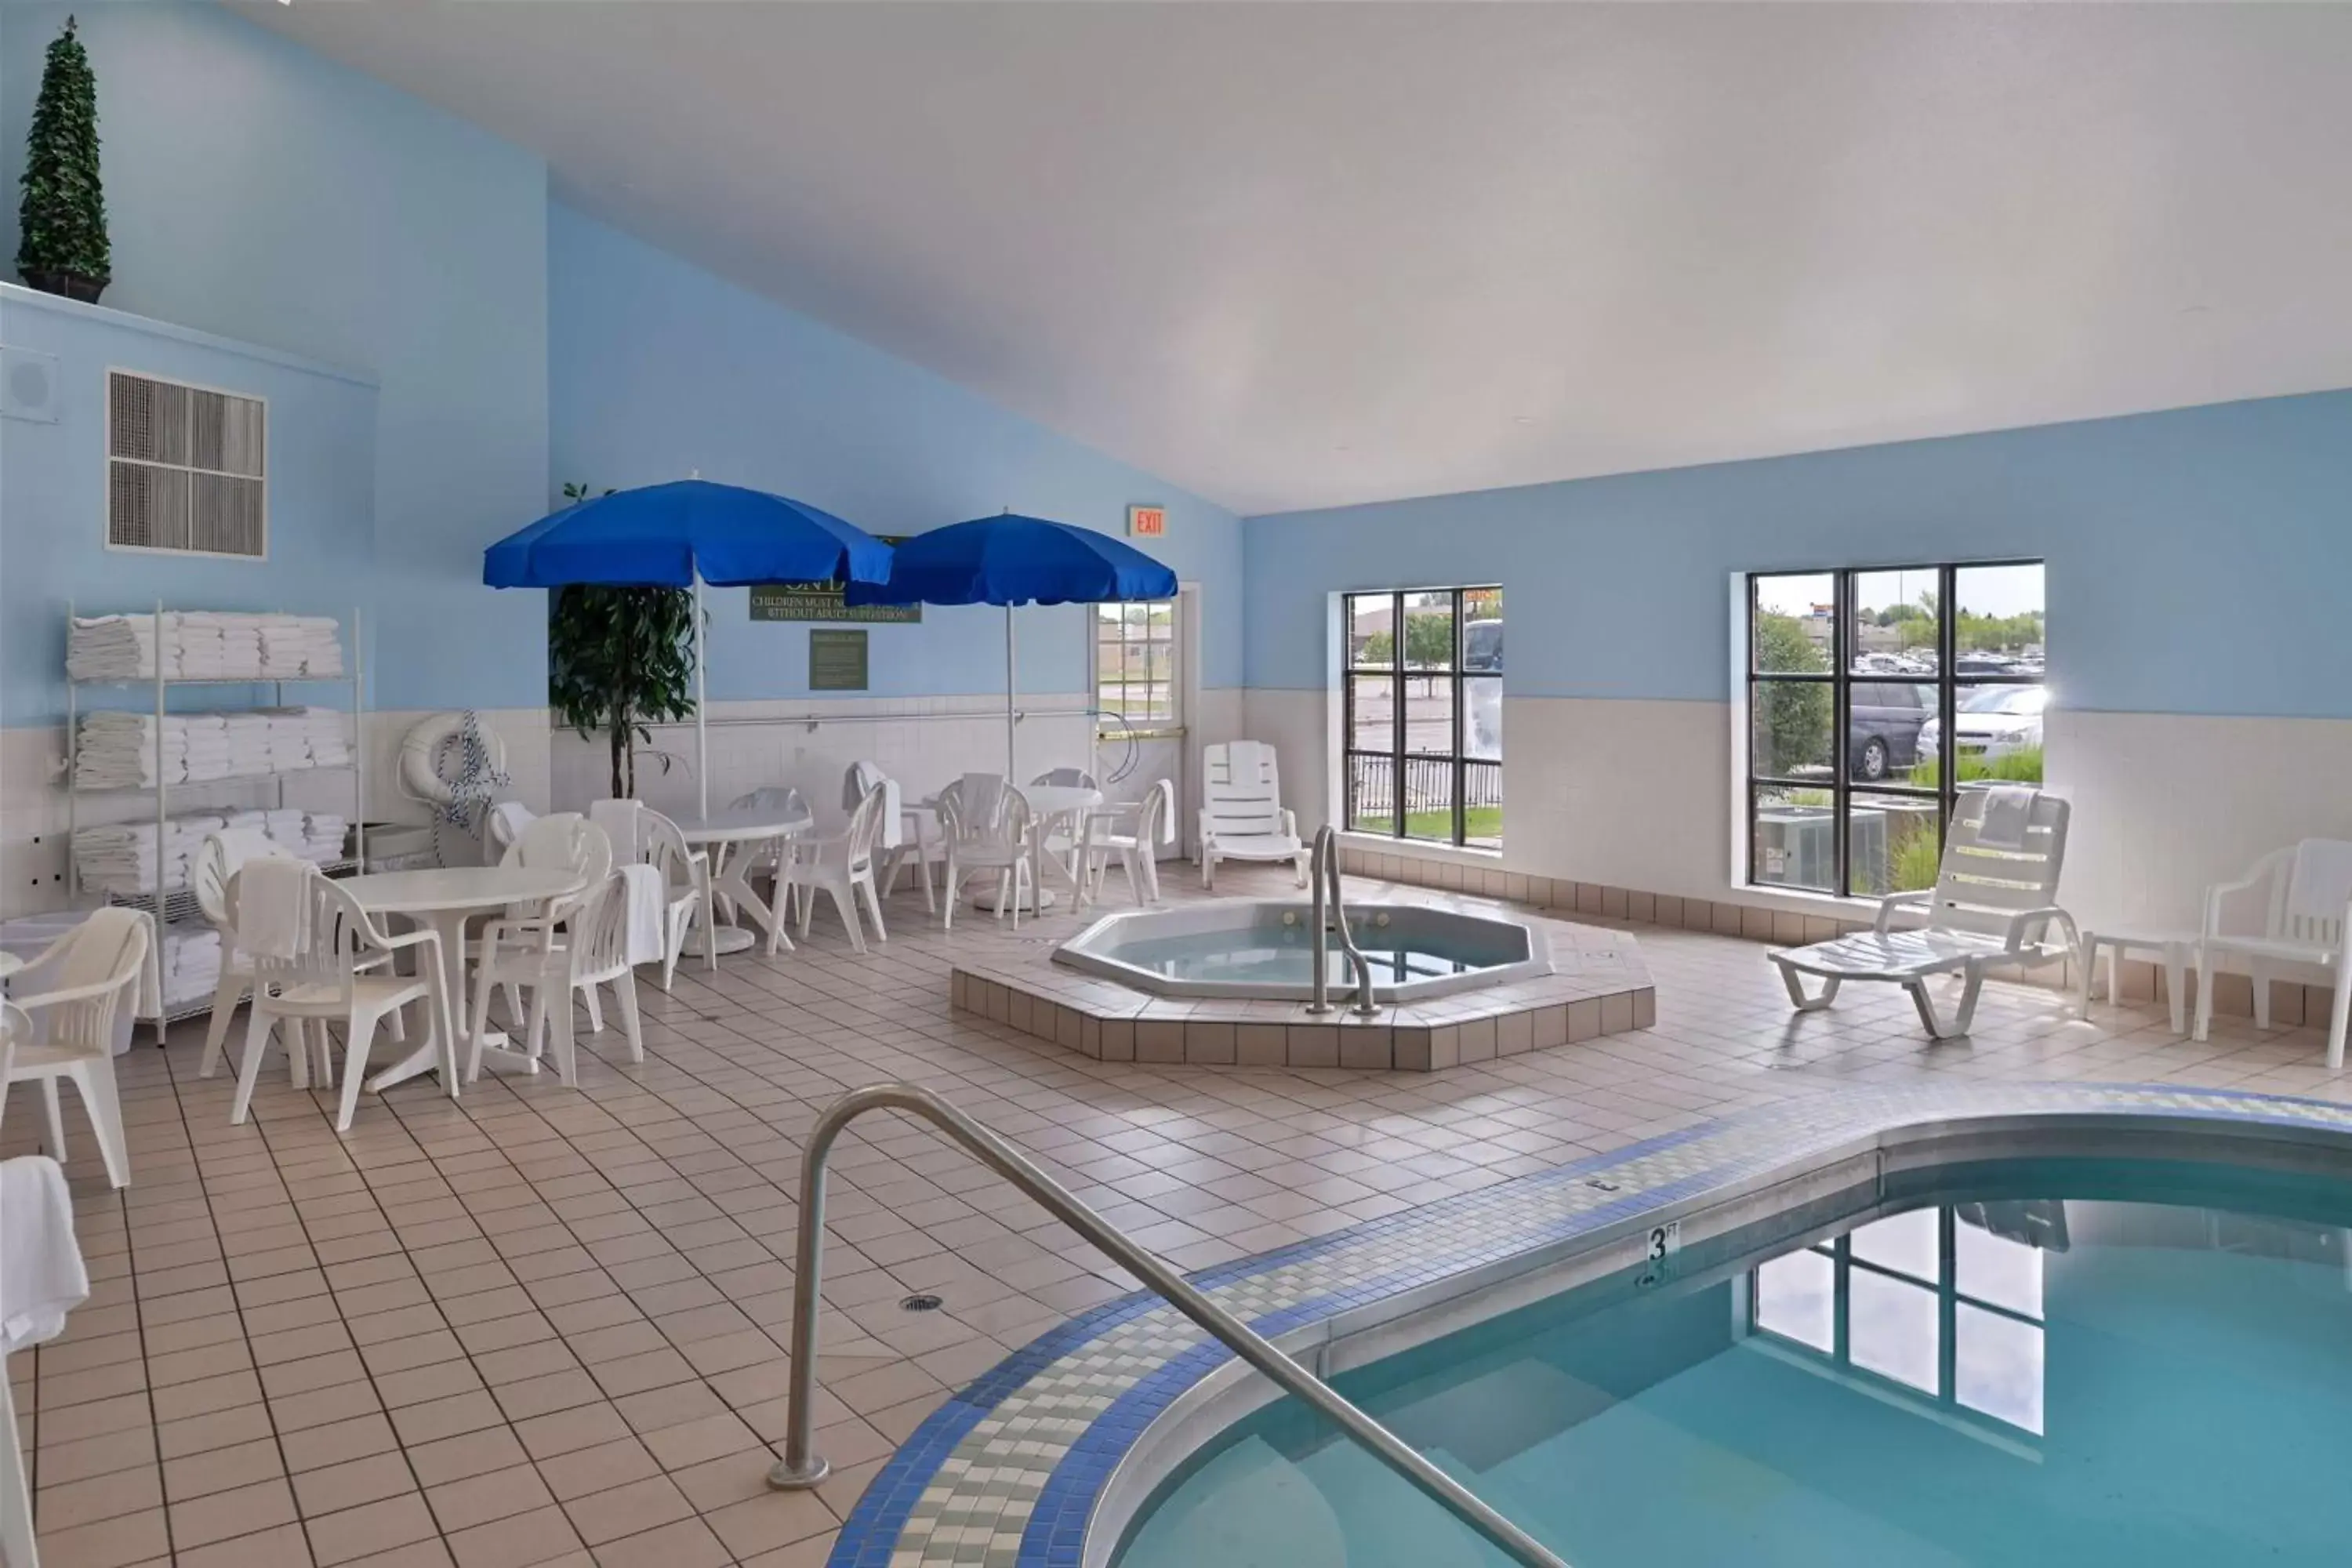 On site, Swimming Pool in Country Inn & Suites by Radisson, Fargo, ND